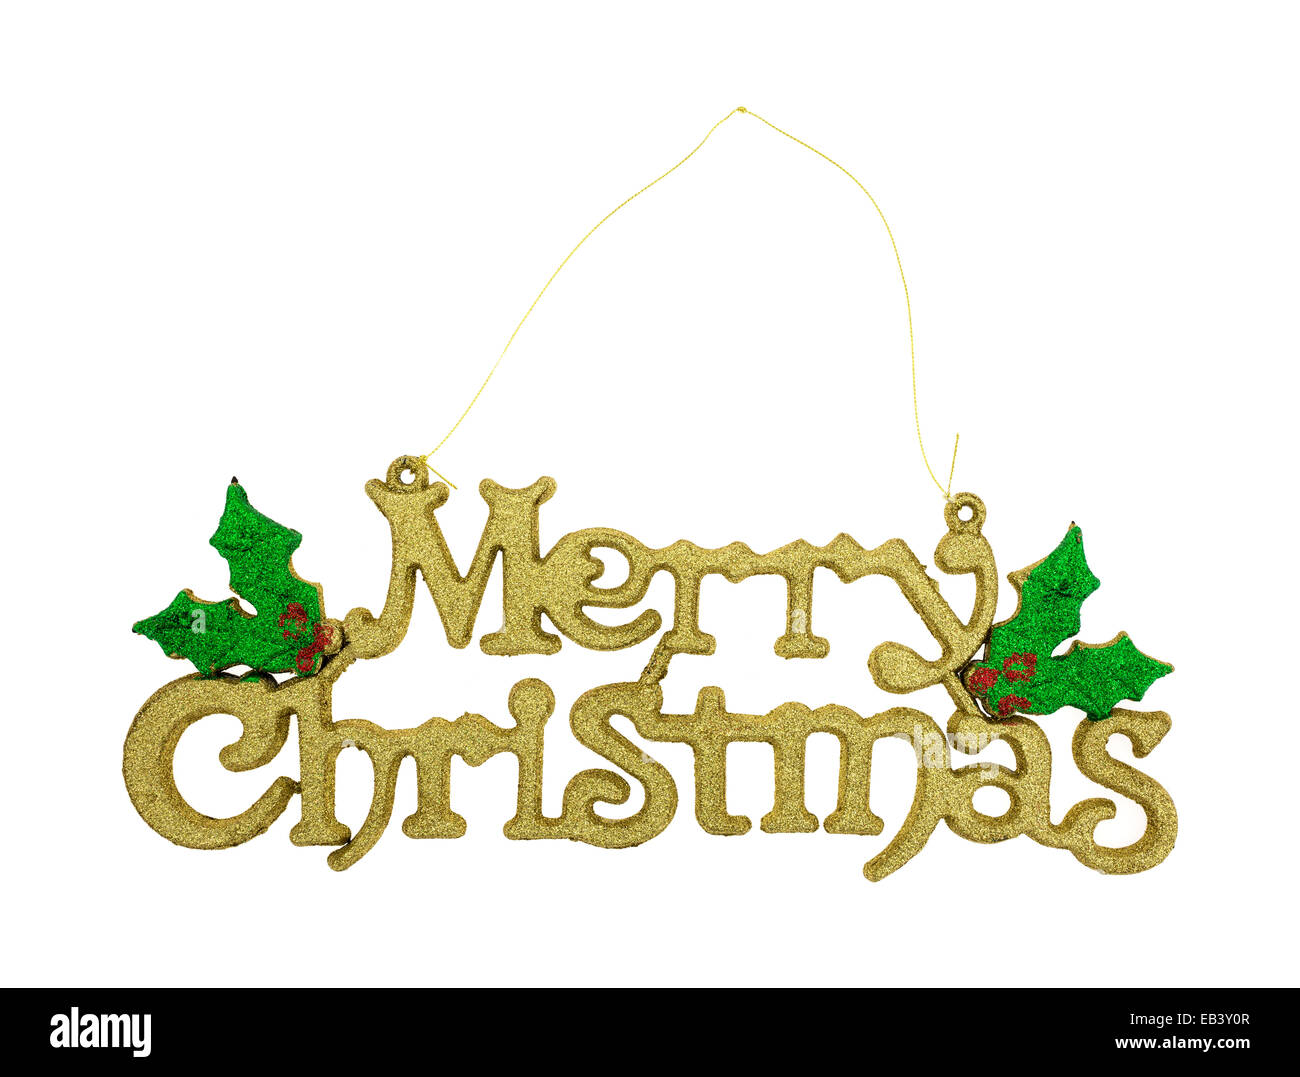 A Merry Christmas hanging decoration in gold glitter with string hanger on a white background. Stock Photo